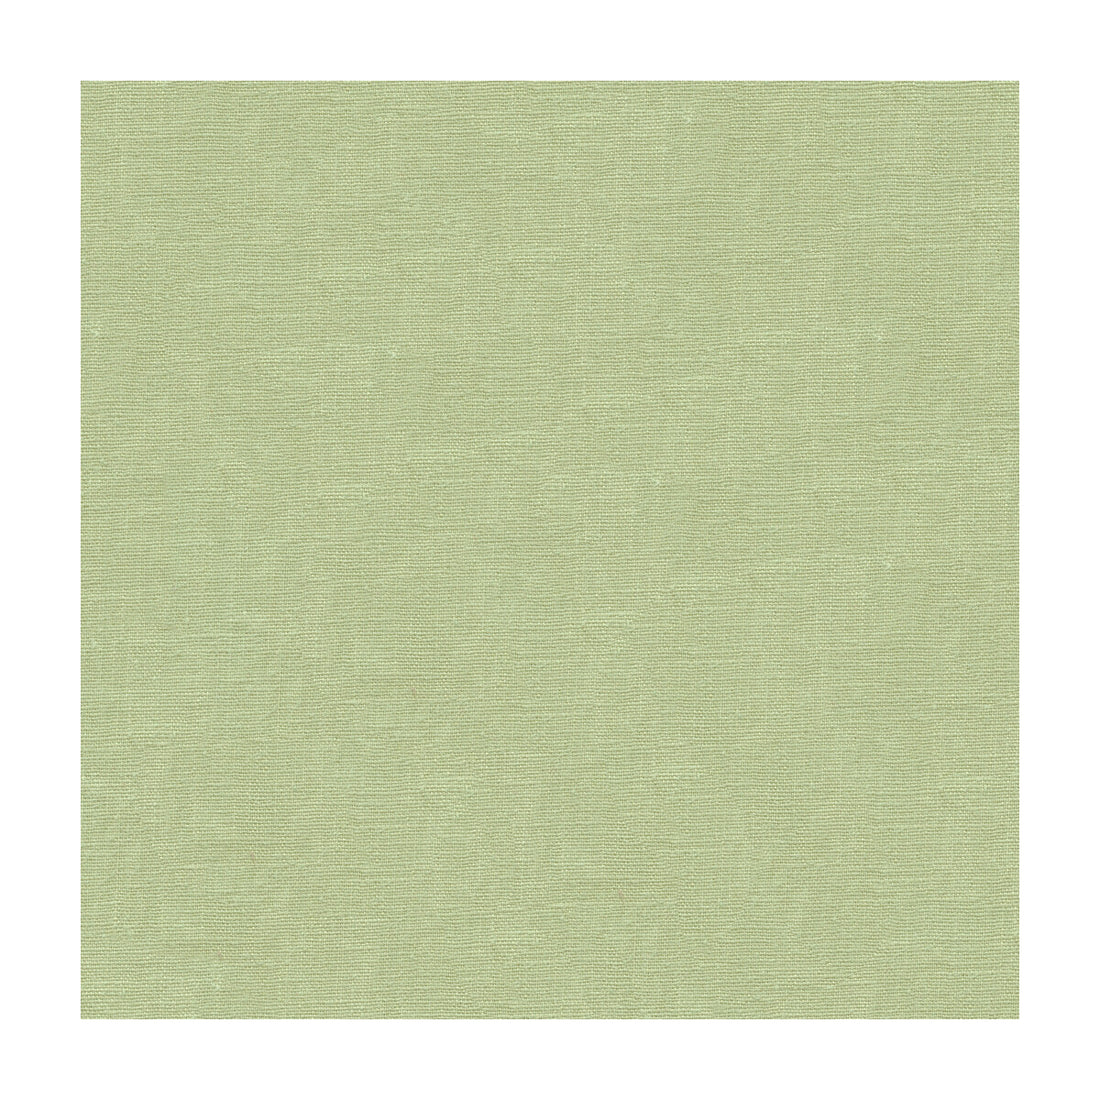 Dublin Linen fabric in jade color - pattern 2012175.130.0 - by Lee Jofa in the Colour Complements II collection